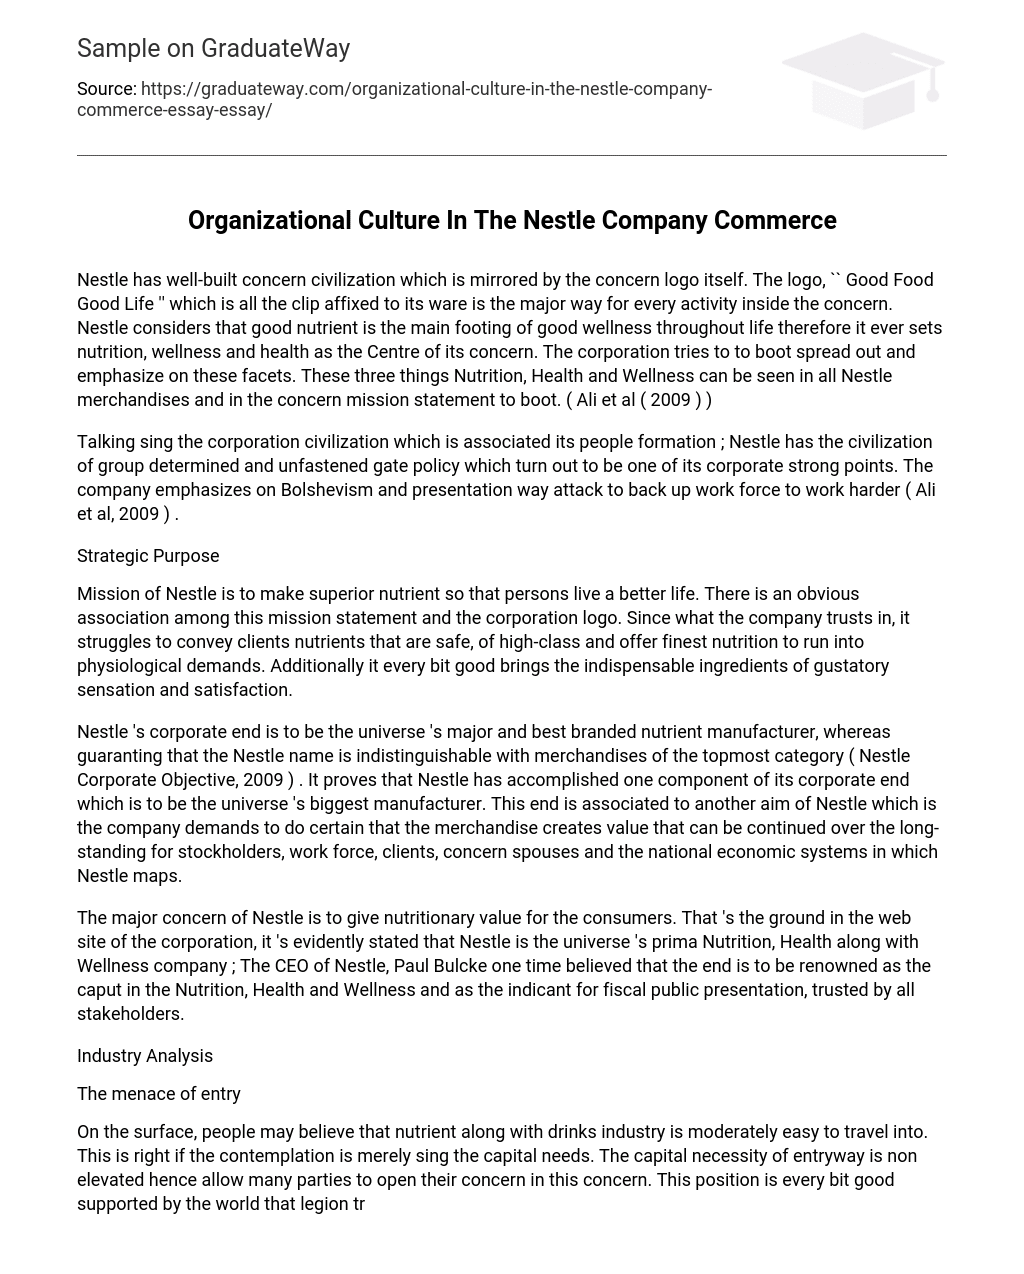 Organizational Culture In The Nestle Company Commerce Analysis